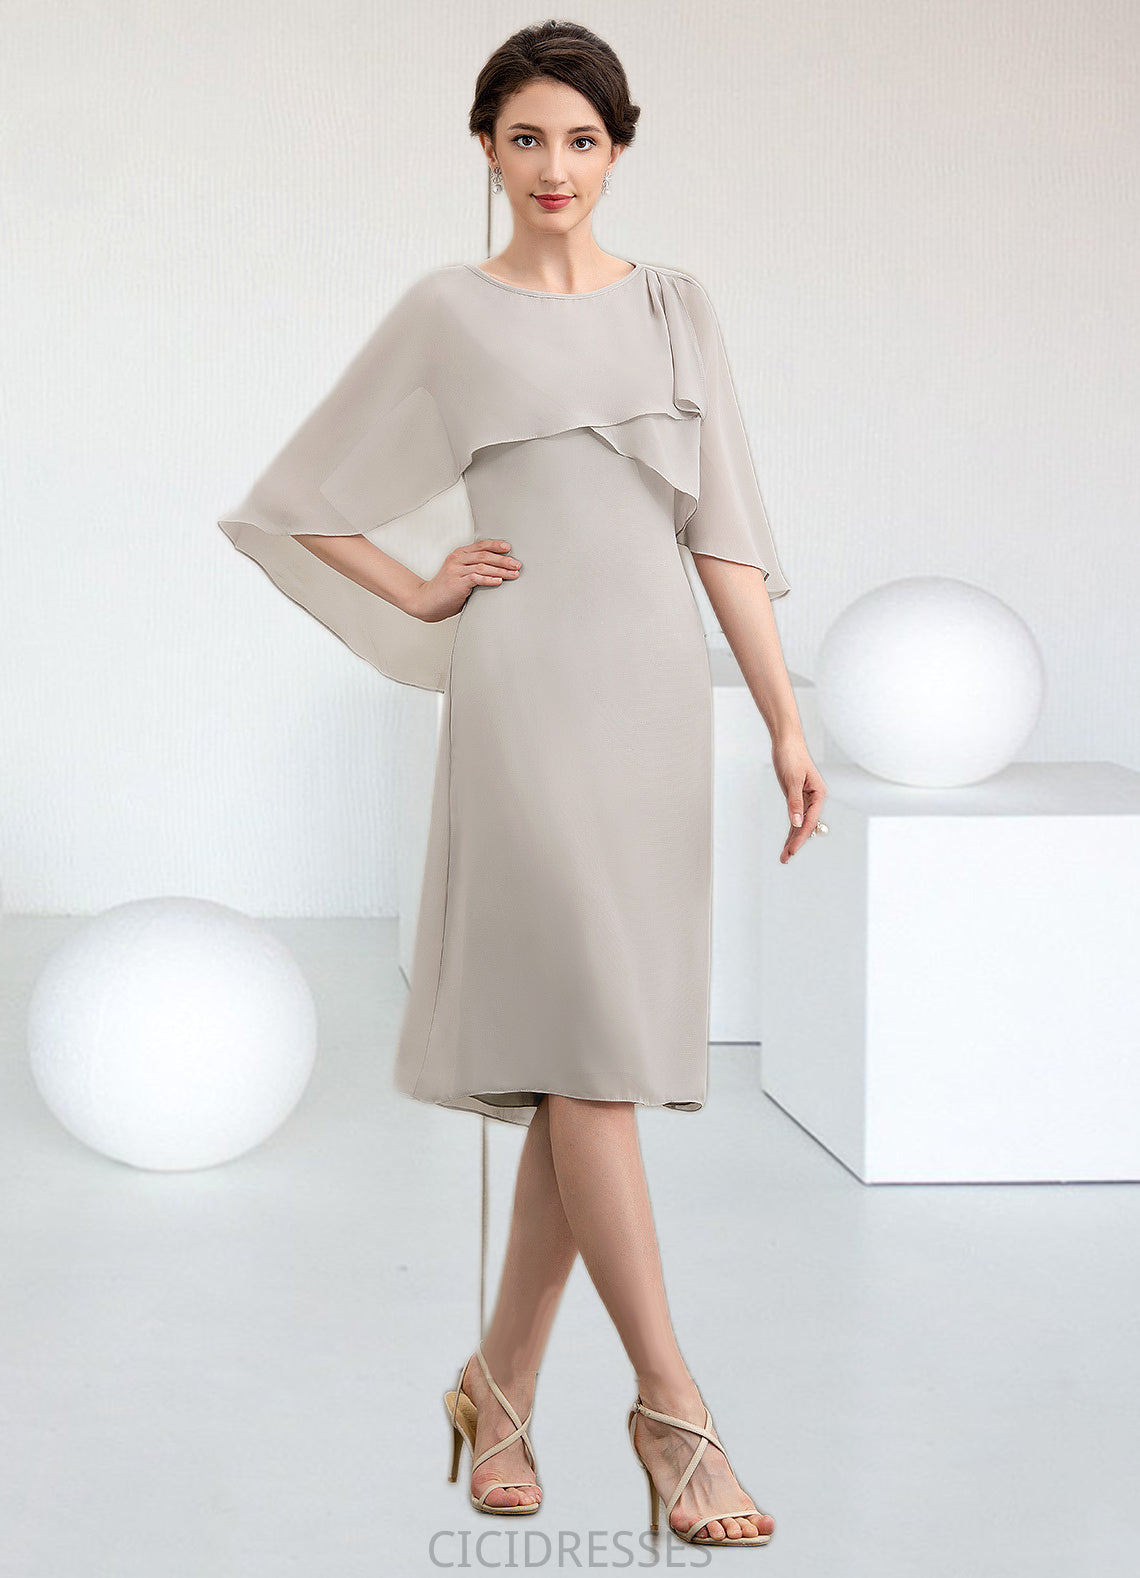 Heaven A-Line Scoop Neck Knee-Length Chiffon Mother of the Bride Dress CIC8126P0014935